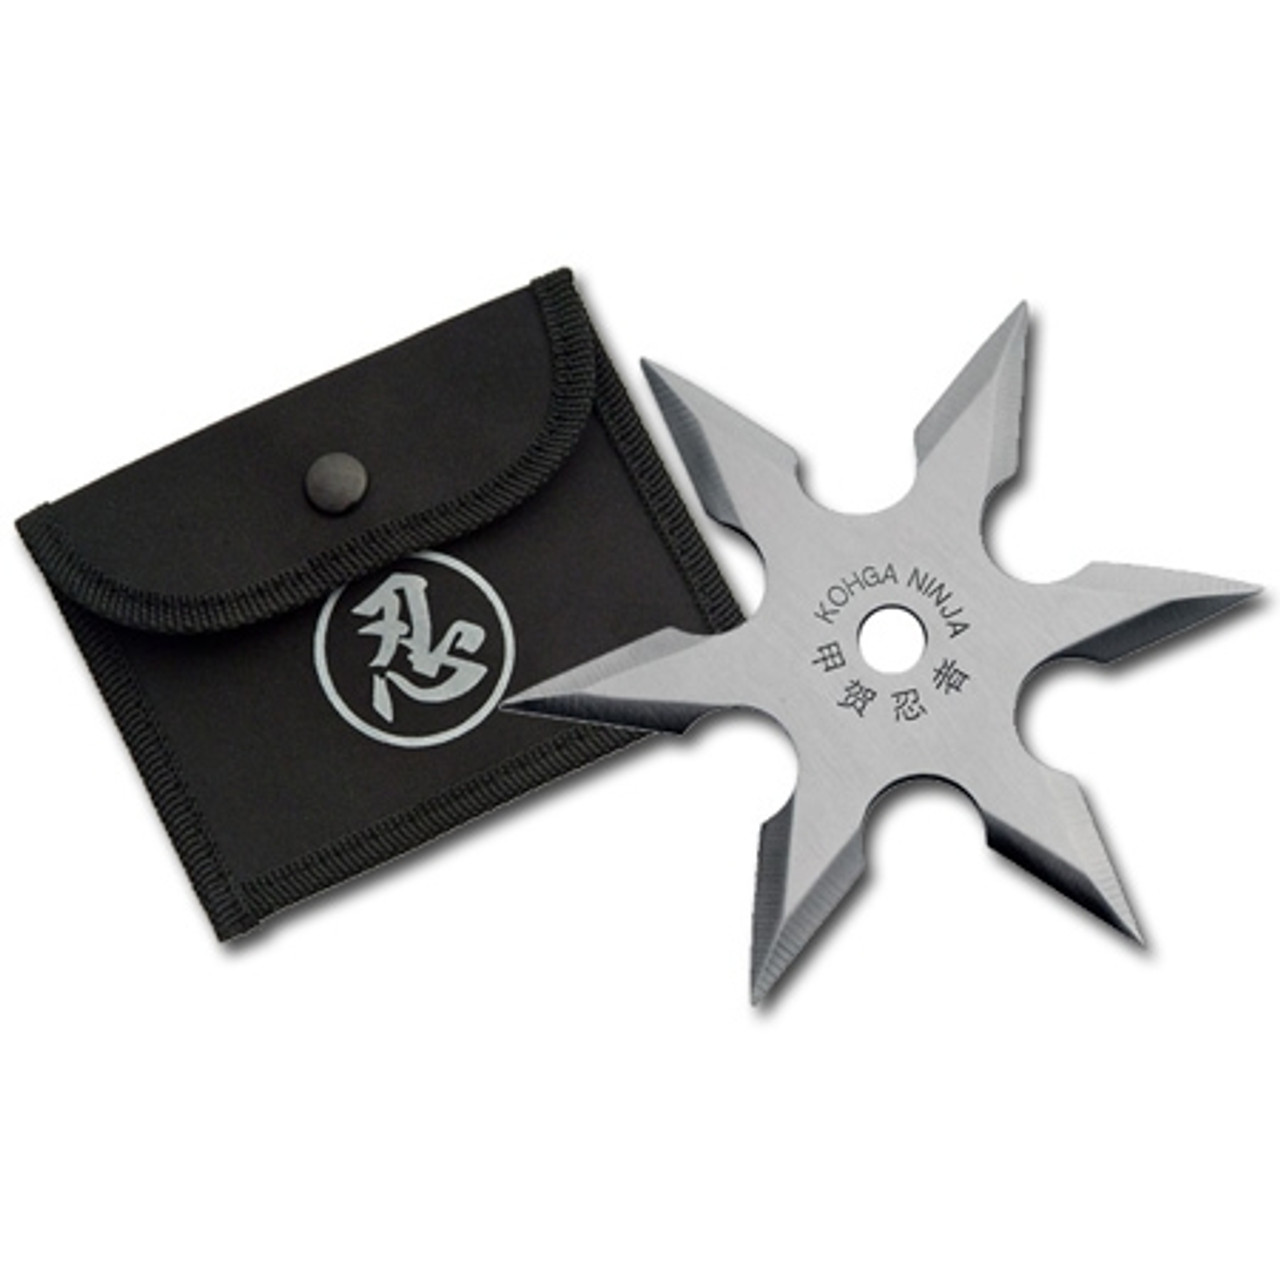 6 Point Throwing Star